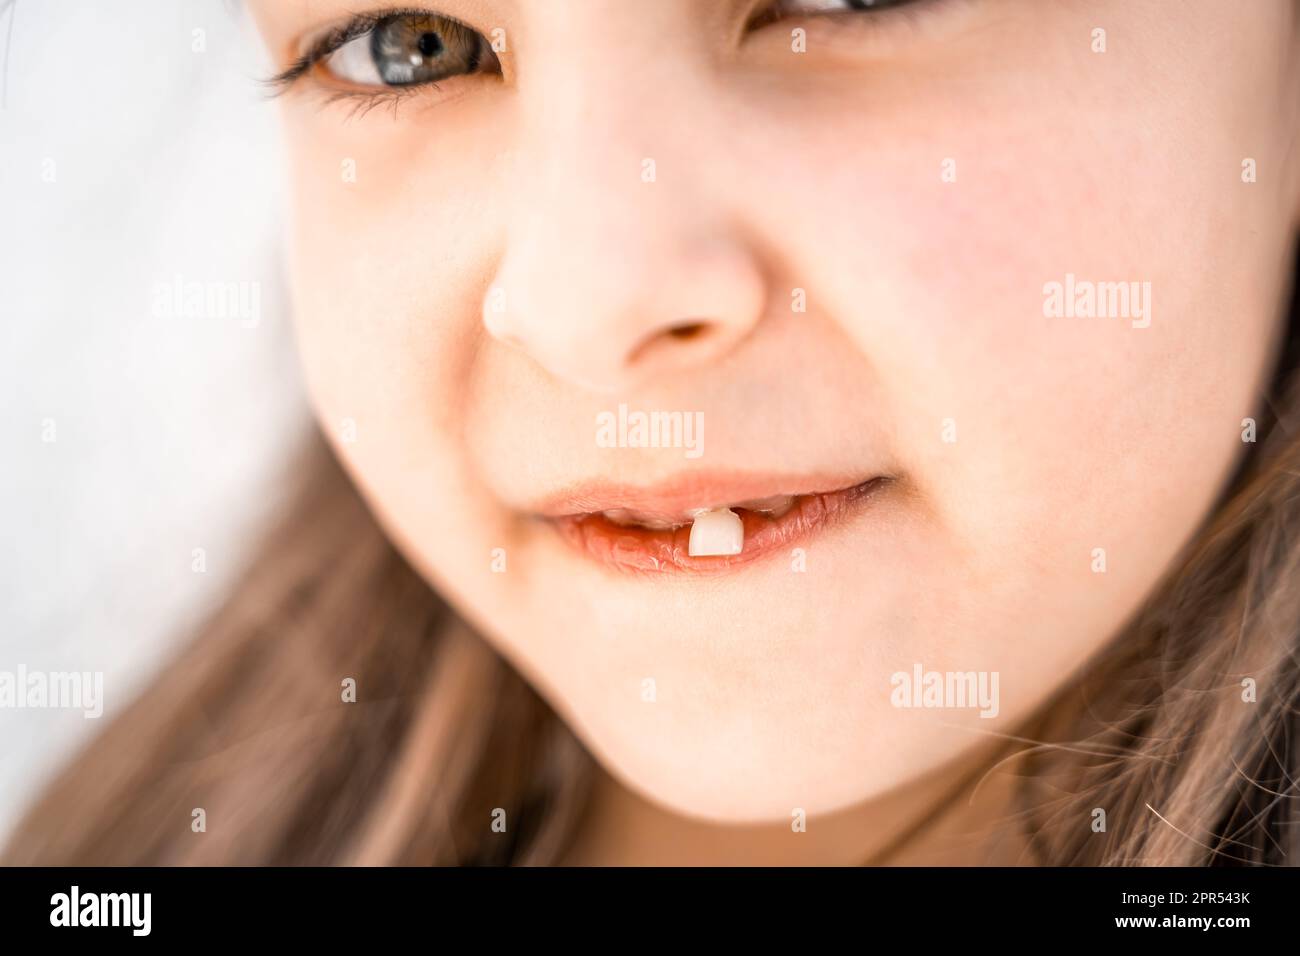 Charming smiling little girl kid with opened mouth shows staggering loose falling out first baby milk front tooth. Preschooler teeth changing. Healthy Stock Photo